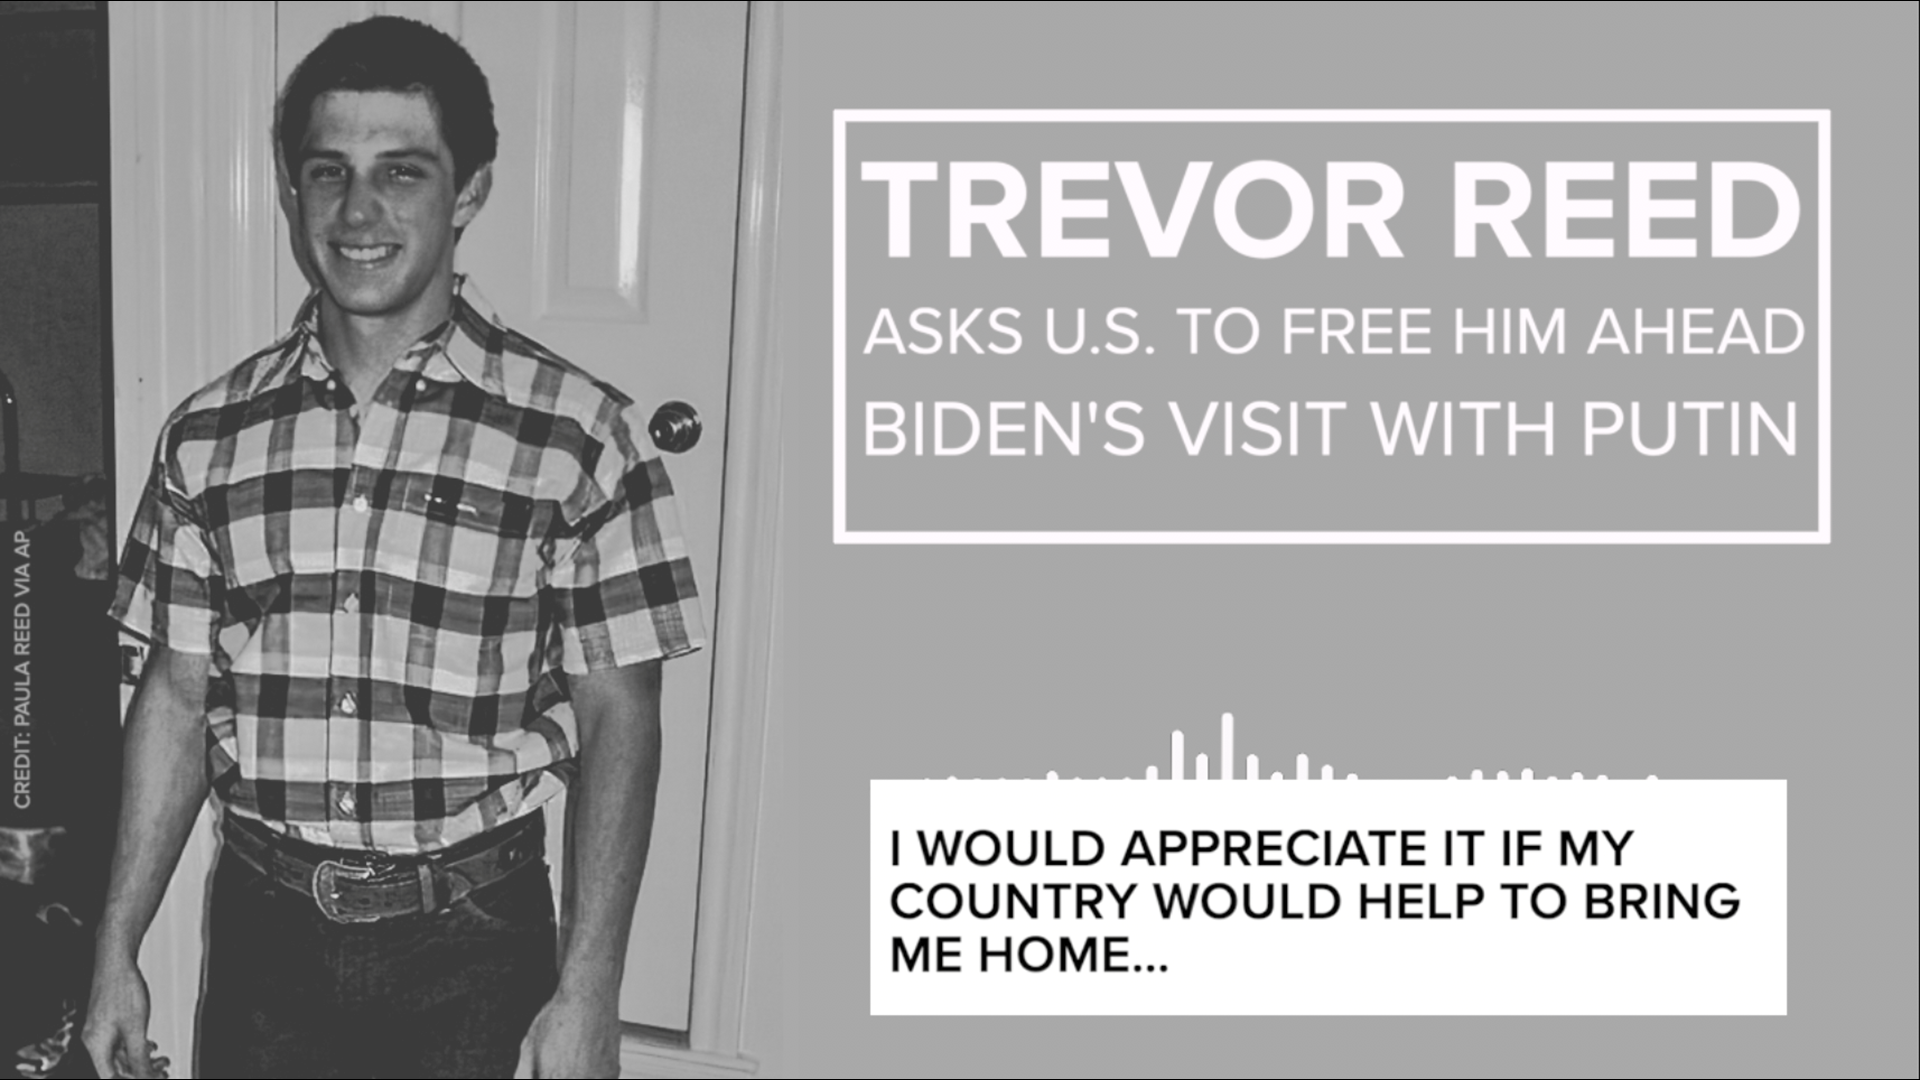 Imprisoned American Trevor Reed is asking the U.S. to help free him from captivity in Russia. The plea comes ahead of President Biden's visit with President Putin.